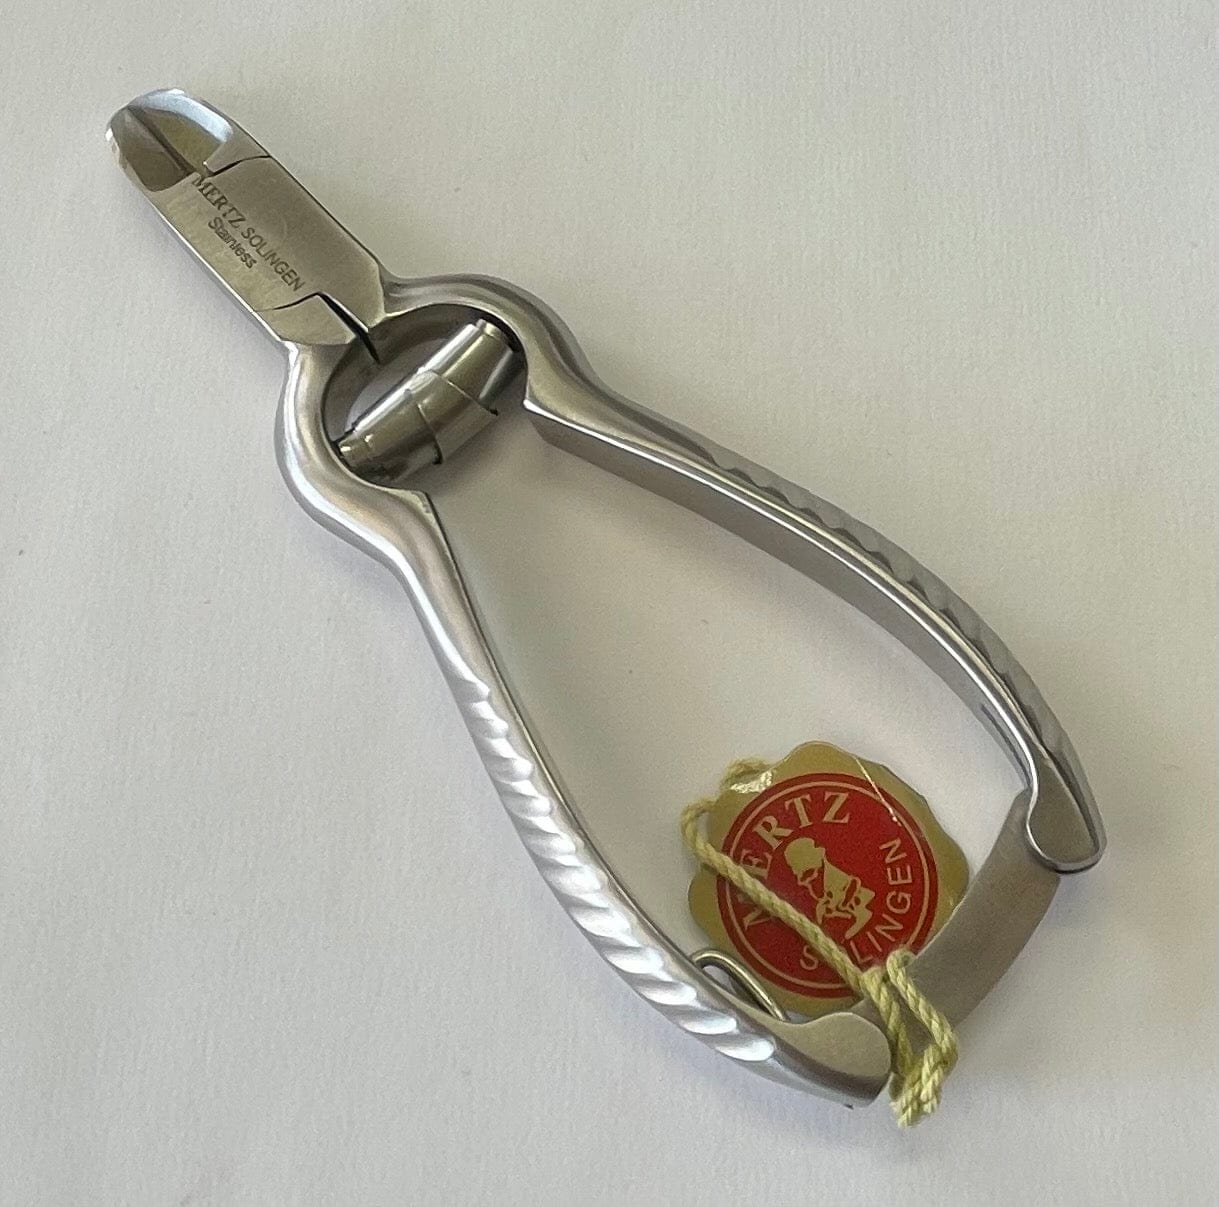 Nail Nipper Lap Joint #661RF1 Stainless Steel